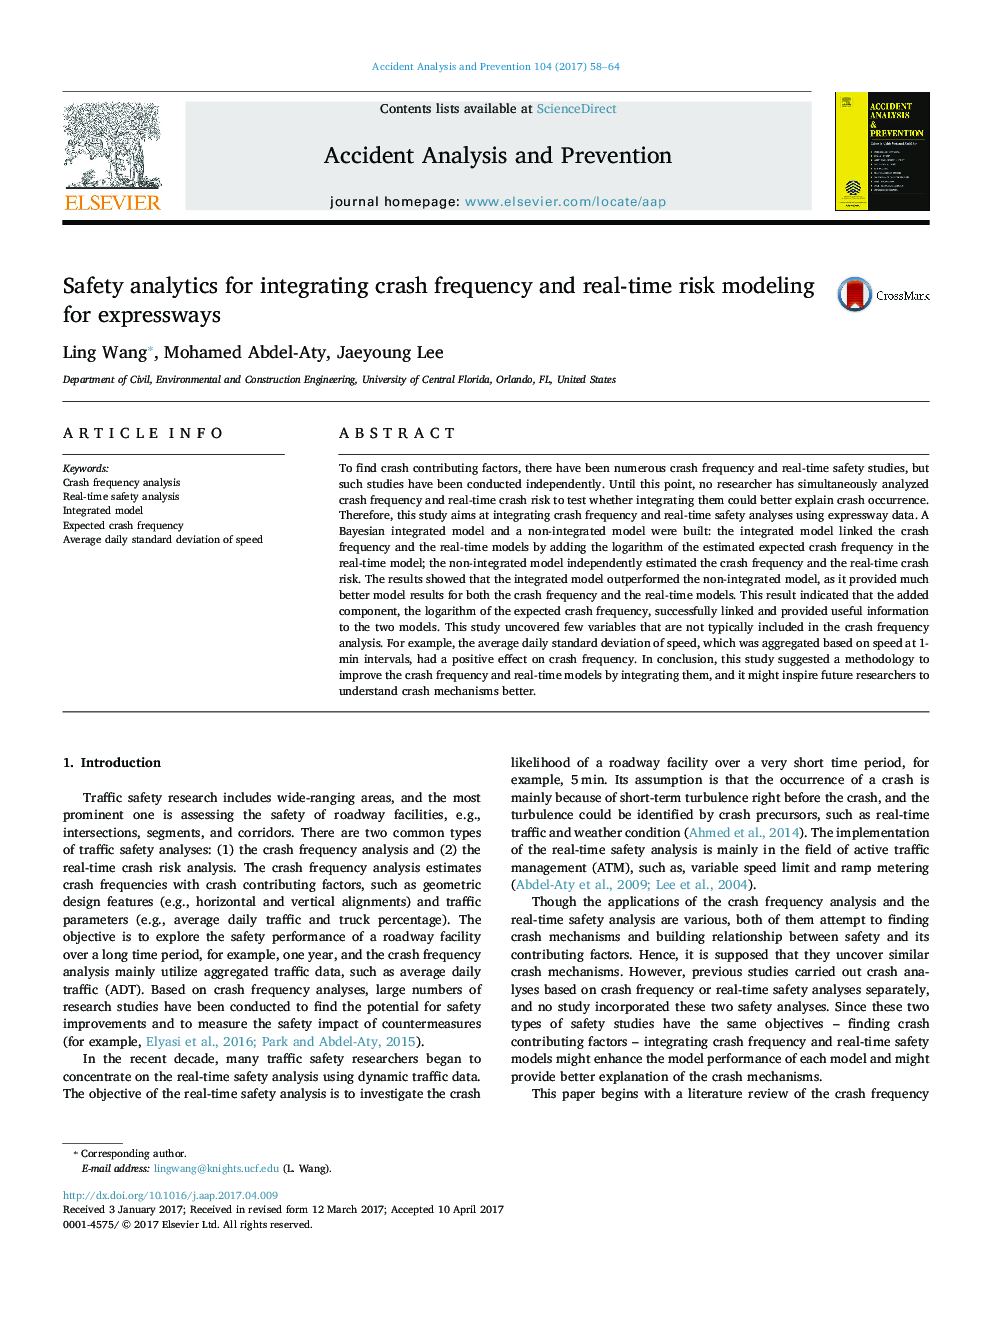 Safety analytics for integrating crash frequency and real-time risk modeling for expressways